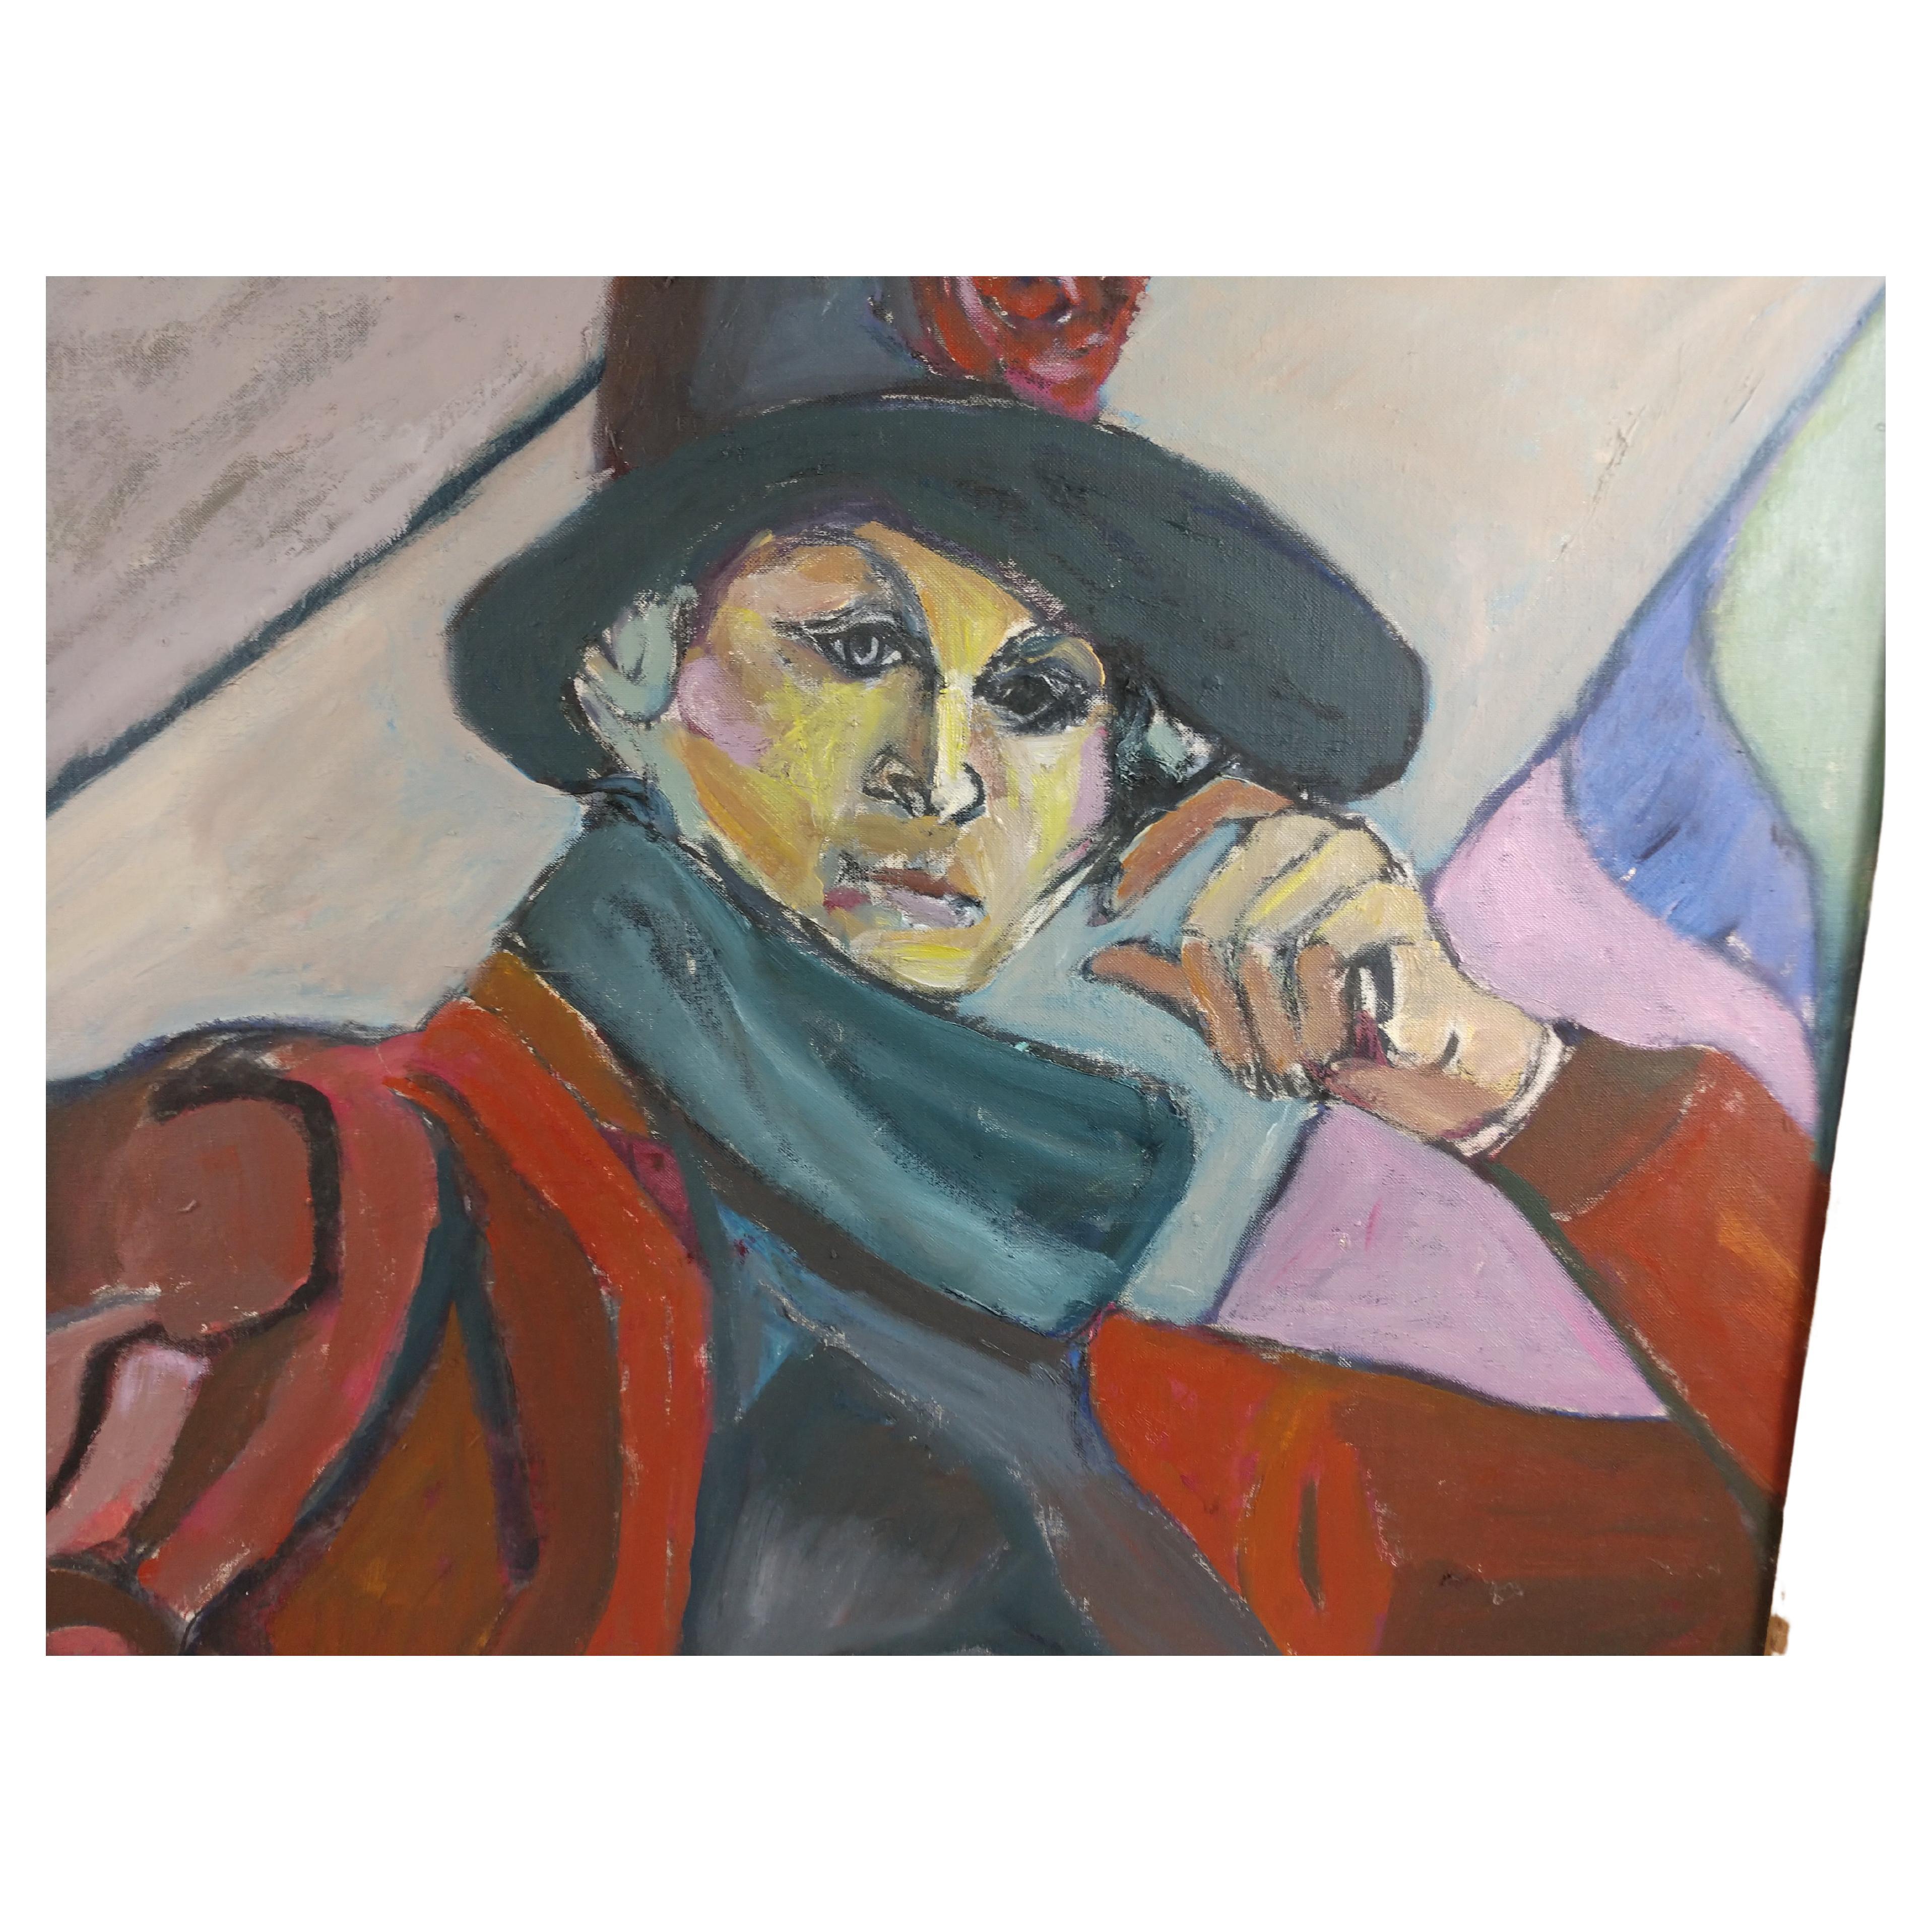 Colorful and impressionist depiction of a woman with hat and scarf. A friend of the artist in Paris. Unframed.